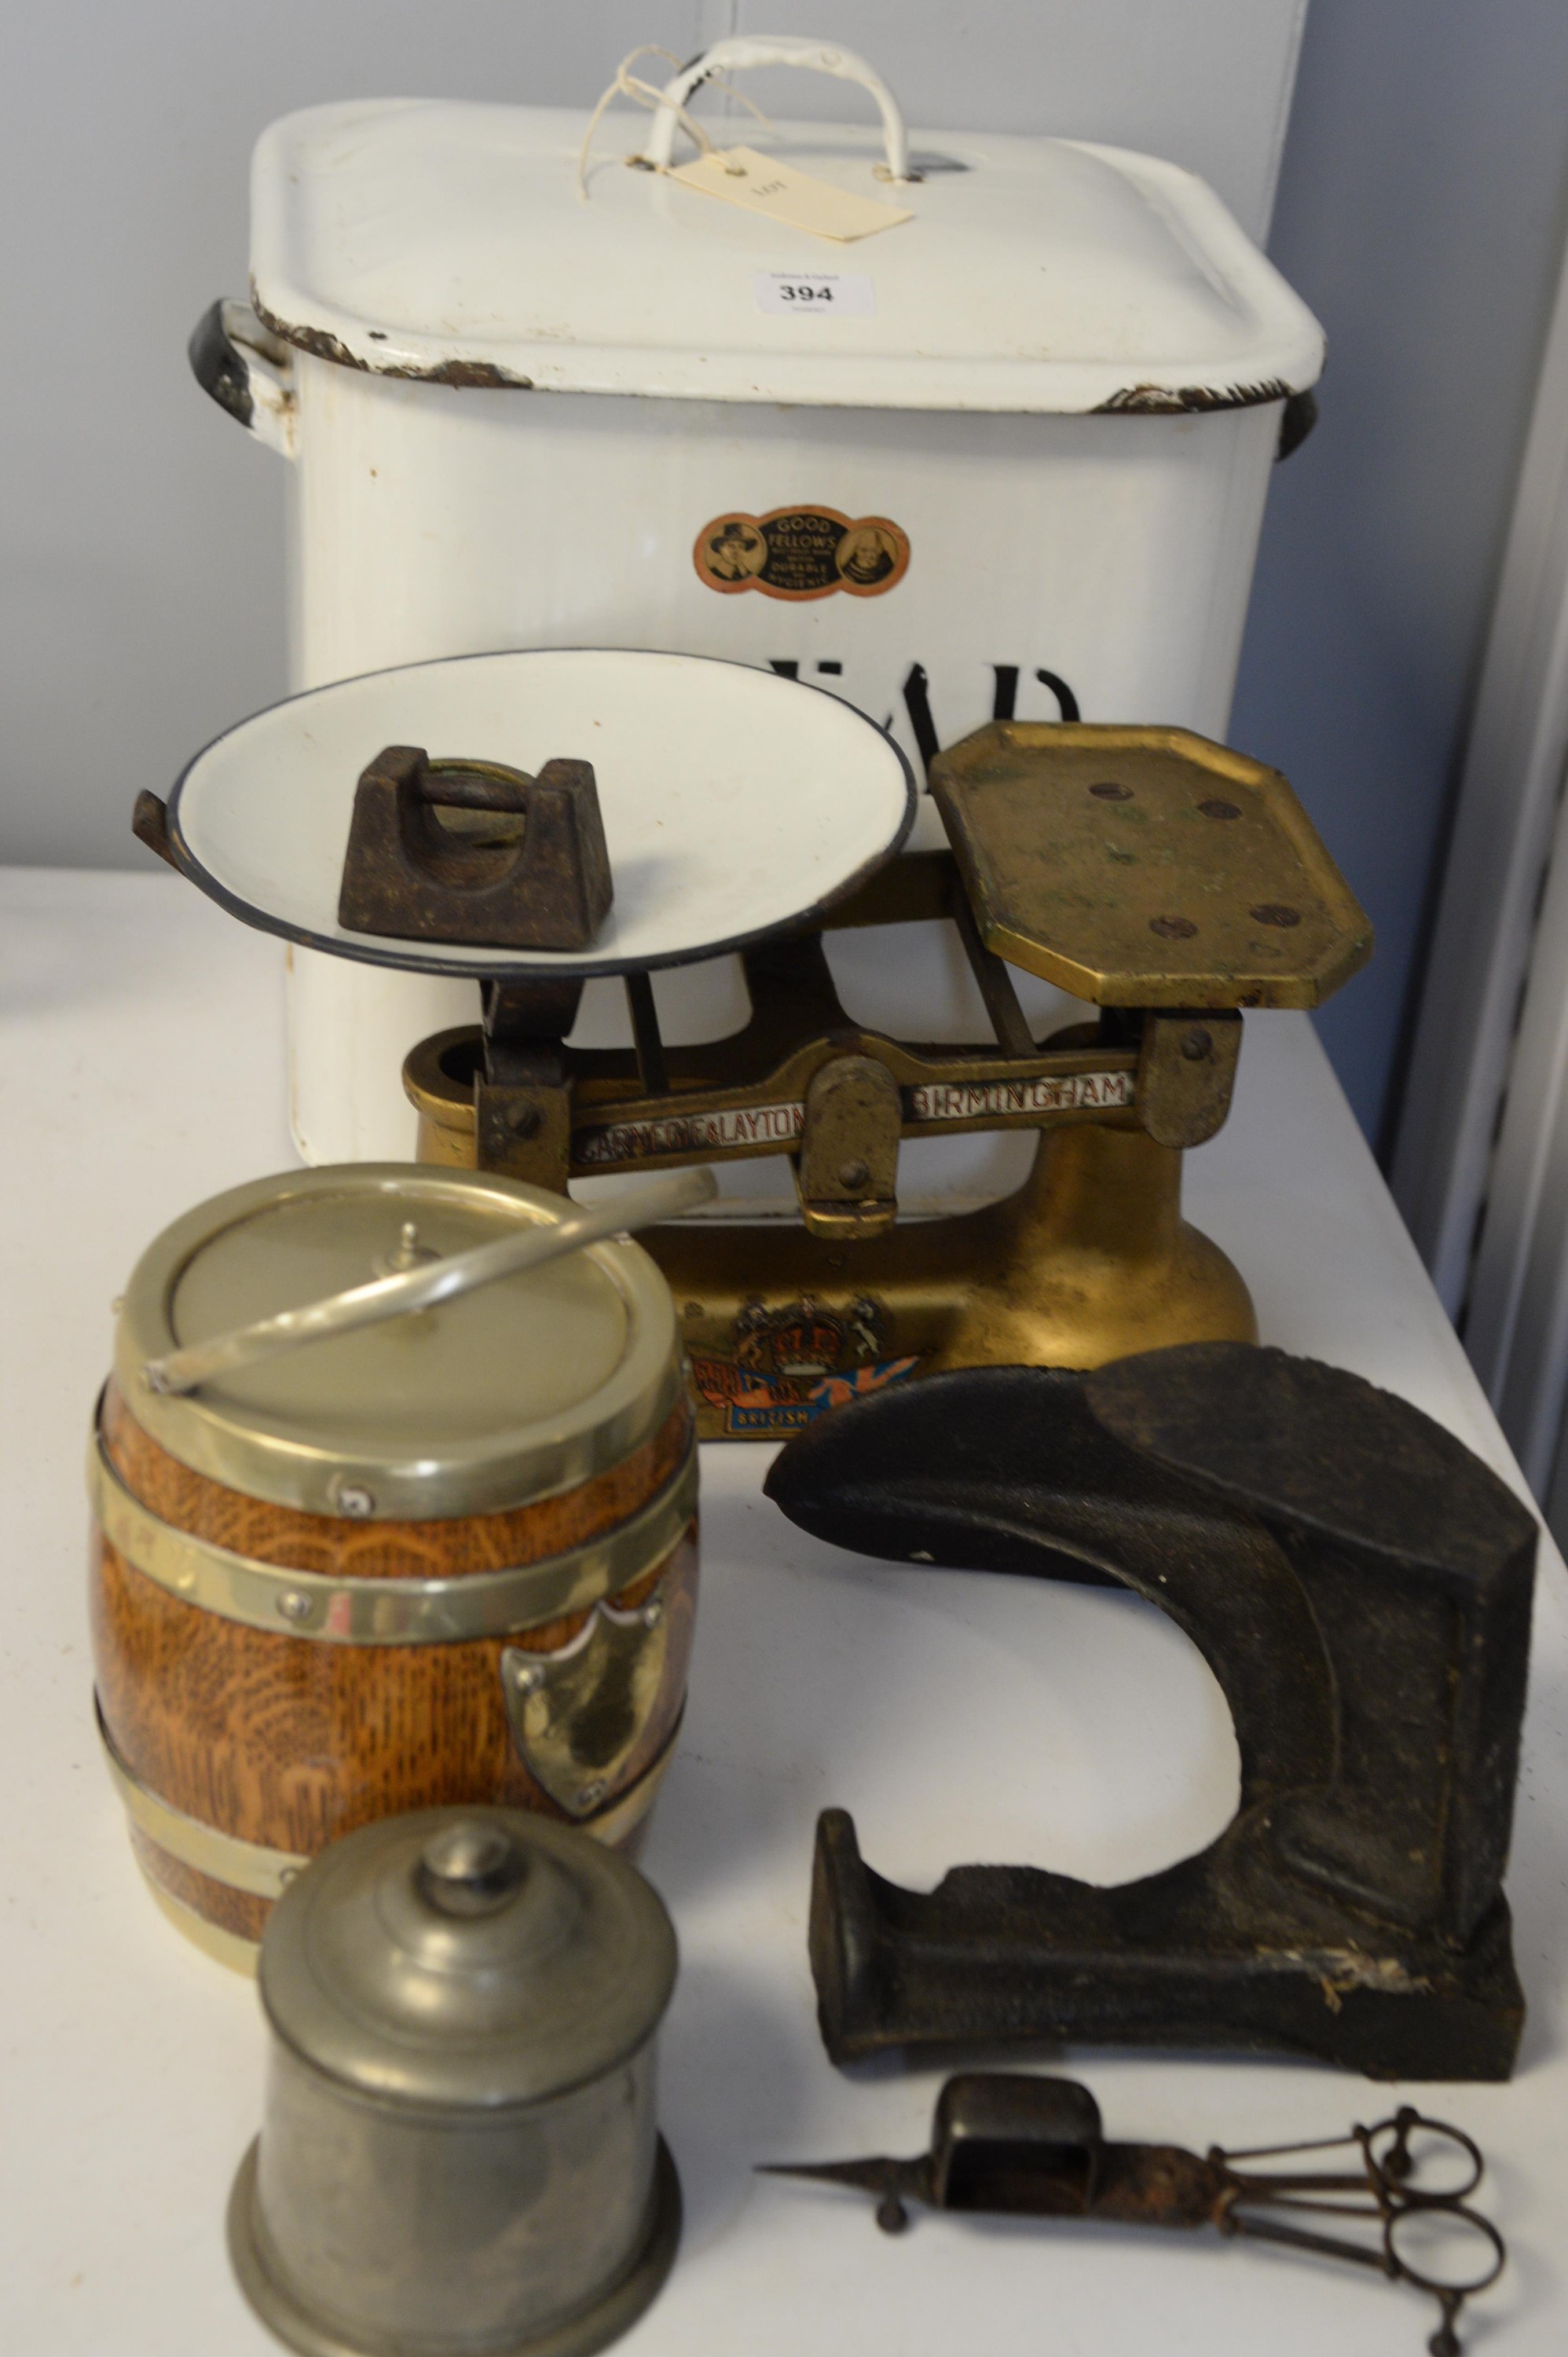 Enamel bread bin, scales, and other items.